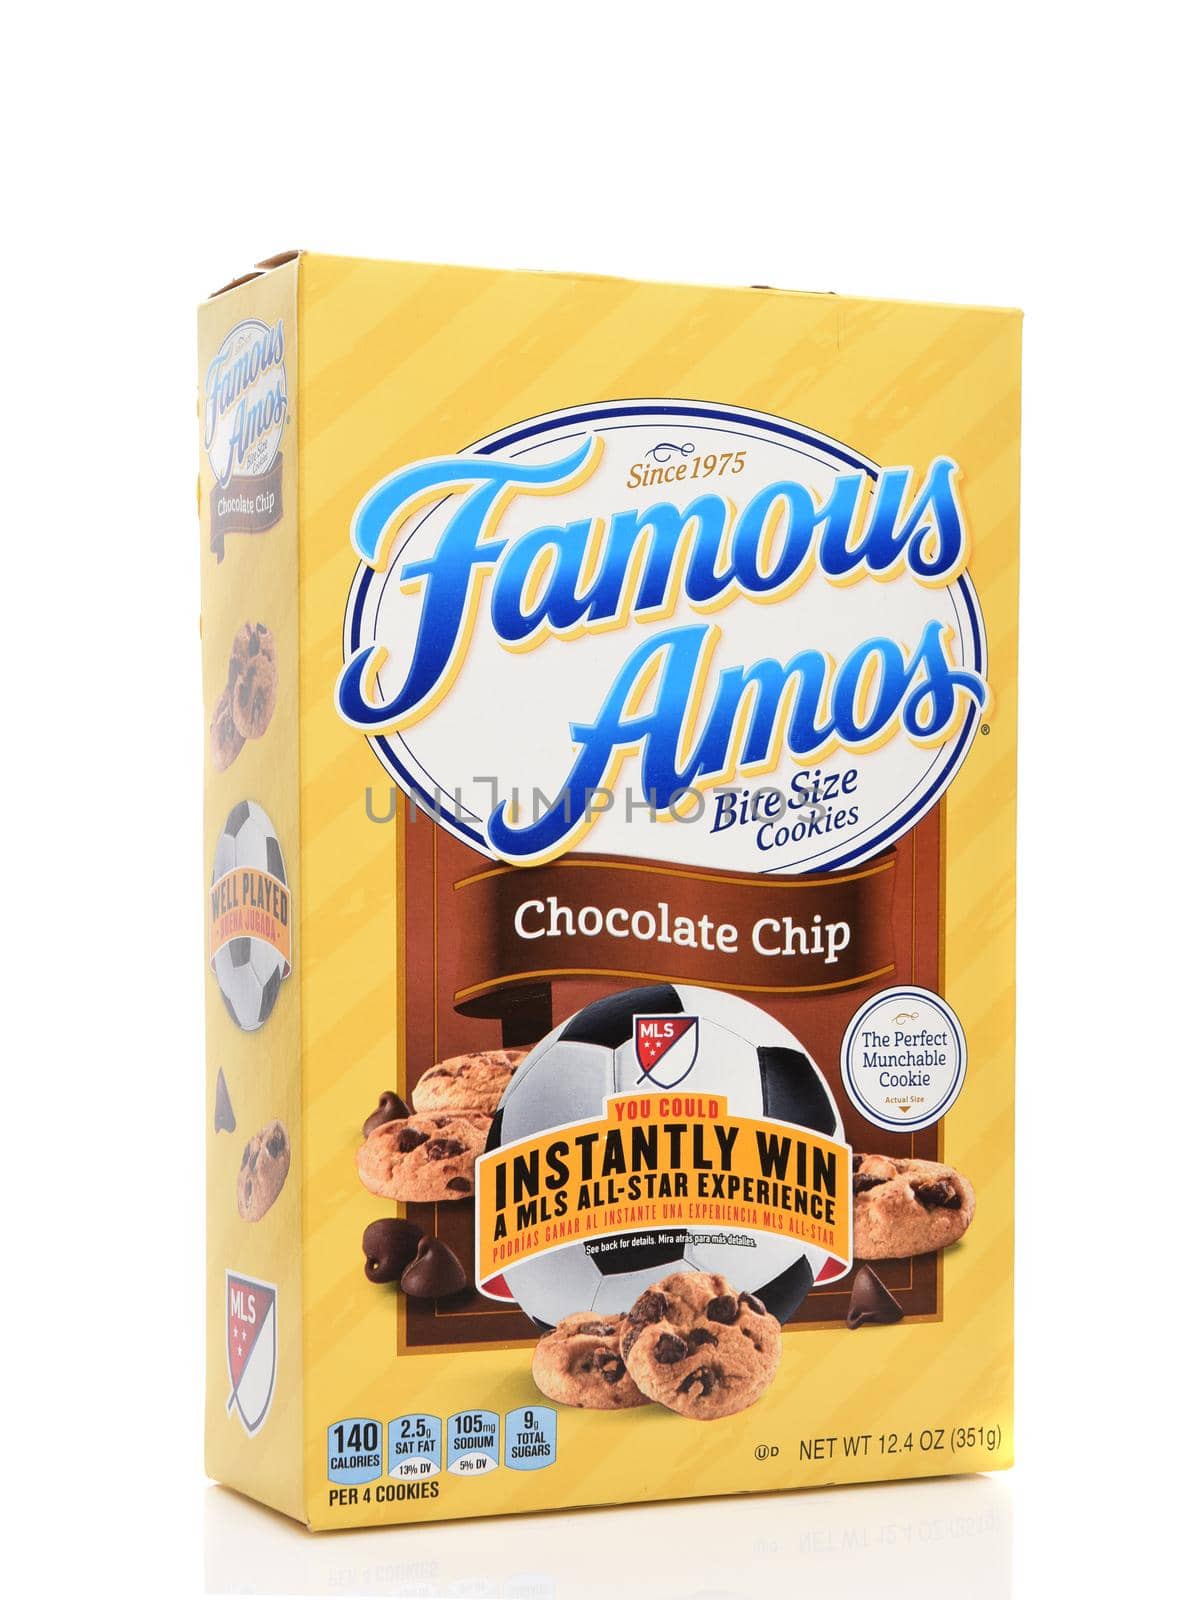 IRVINE, CALIFORNIA - AUGUST 14, 2019: A box of Famous Amos bite size chocolate chip cookies by sCukrov